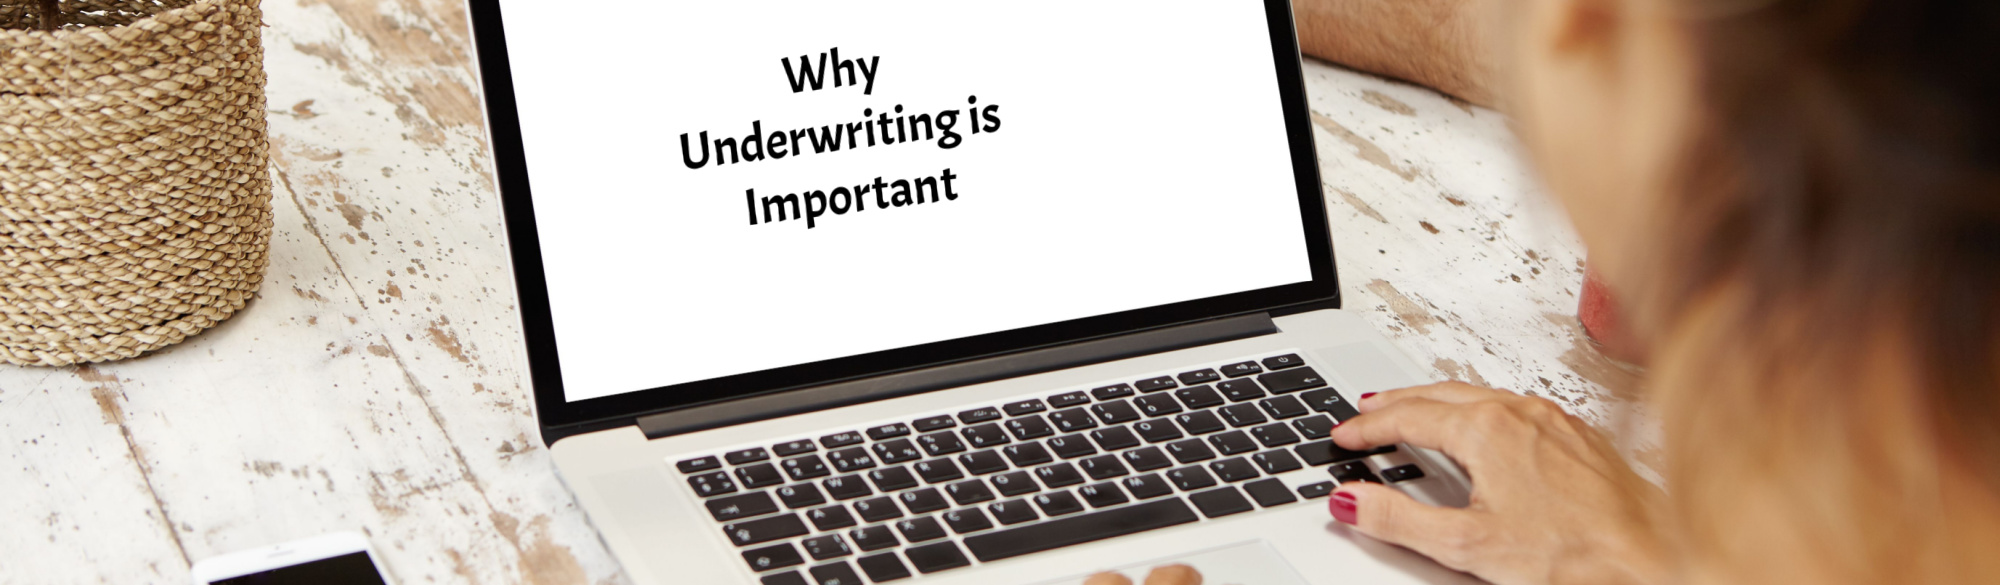 image of why underwriting is important